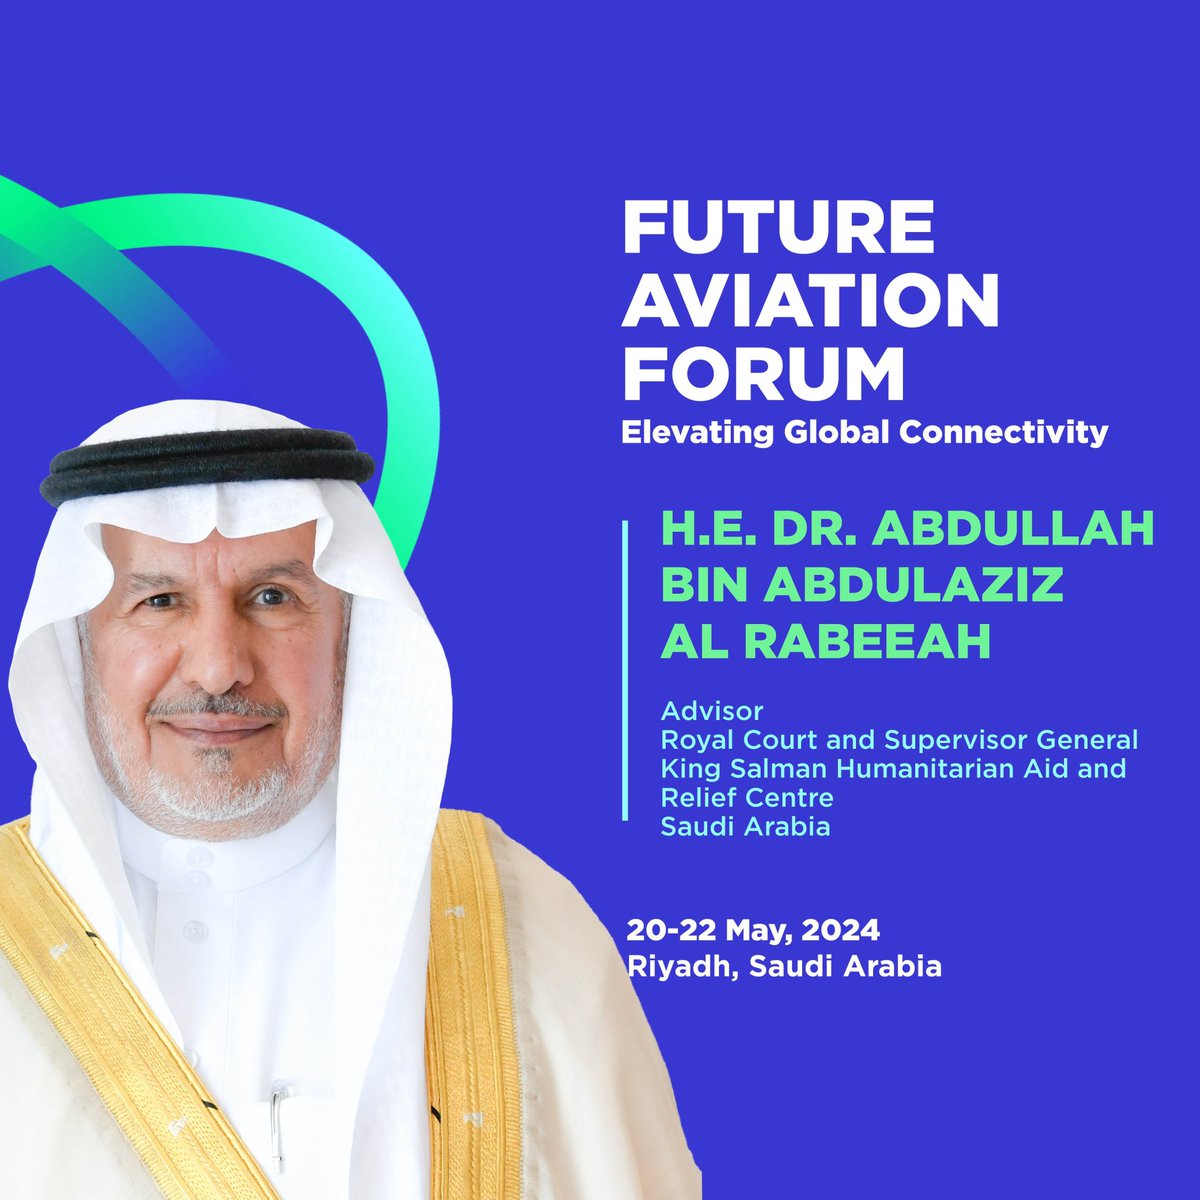 Discover how aviation supports humanitarian relief by enabling evacuations, delivering supplies, and providing essential services with insights from H.E. Dr. Abdullah bin Abdulaziz Al Rabeeah, Advisor of the Royal Court and Supervisor General of @KSRelief_EN, at the